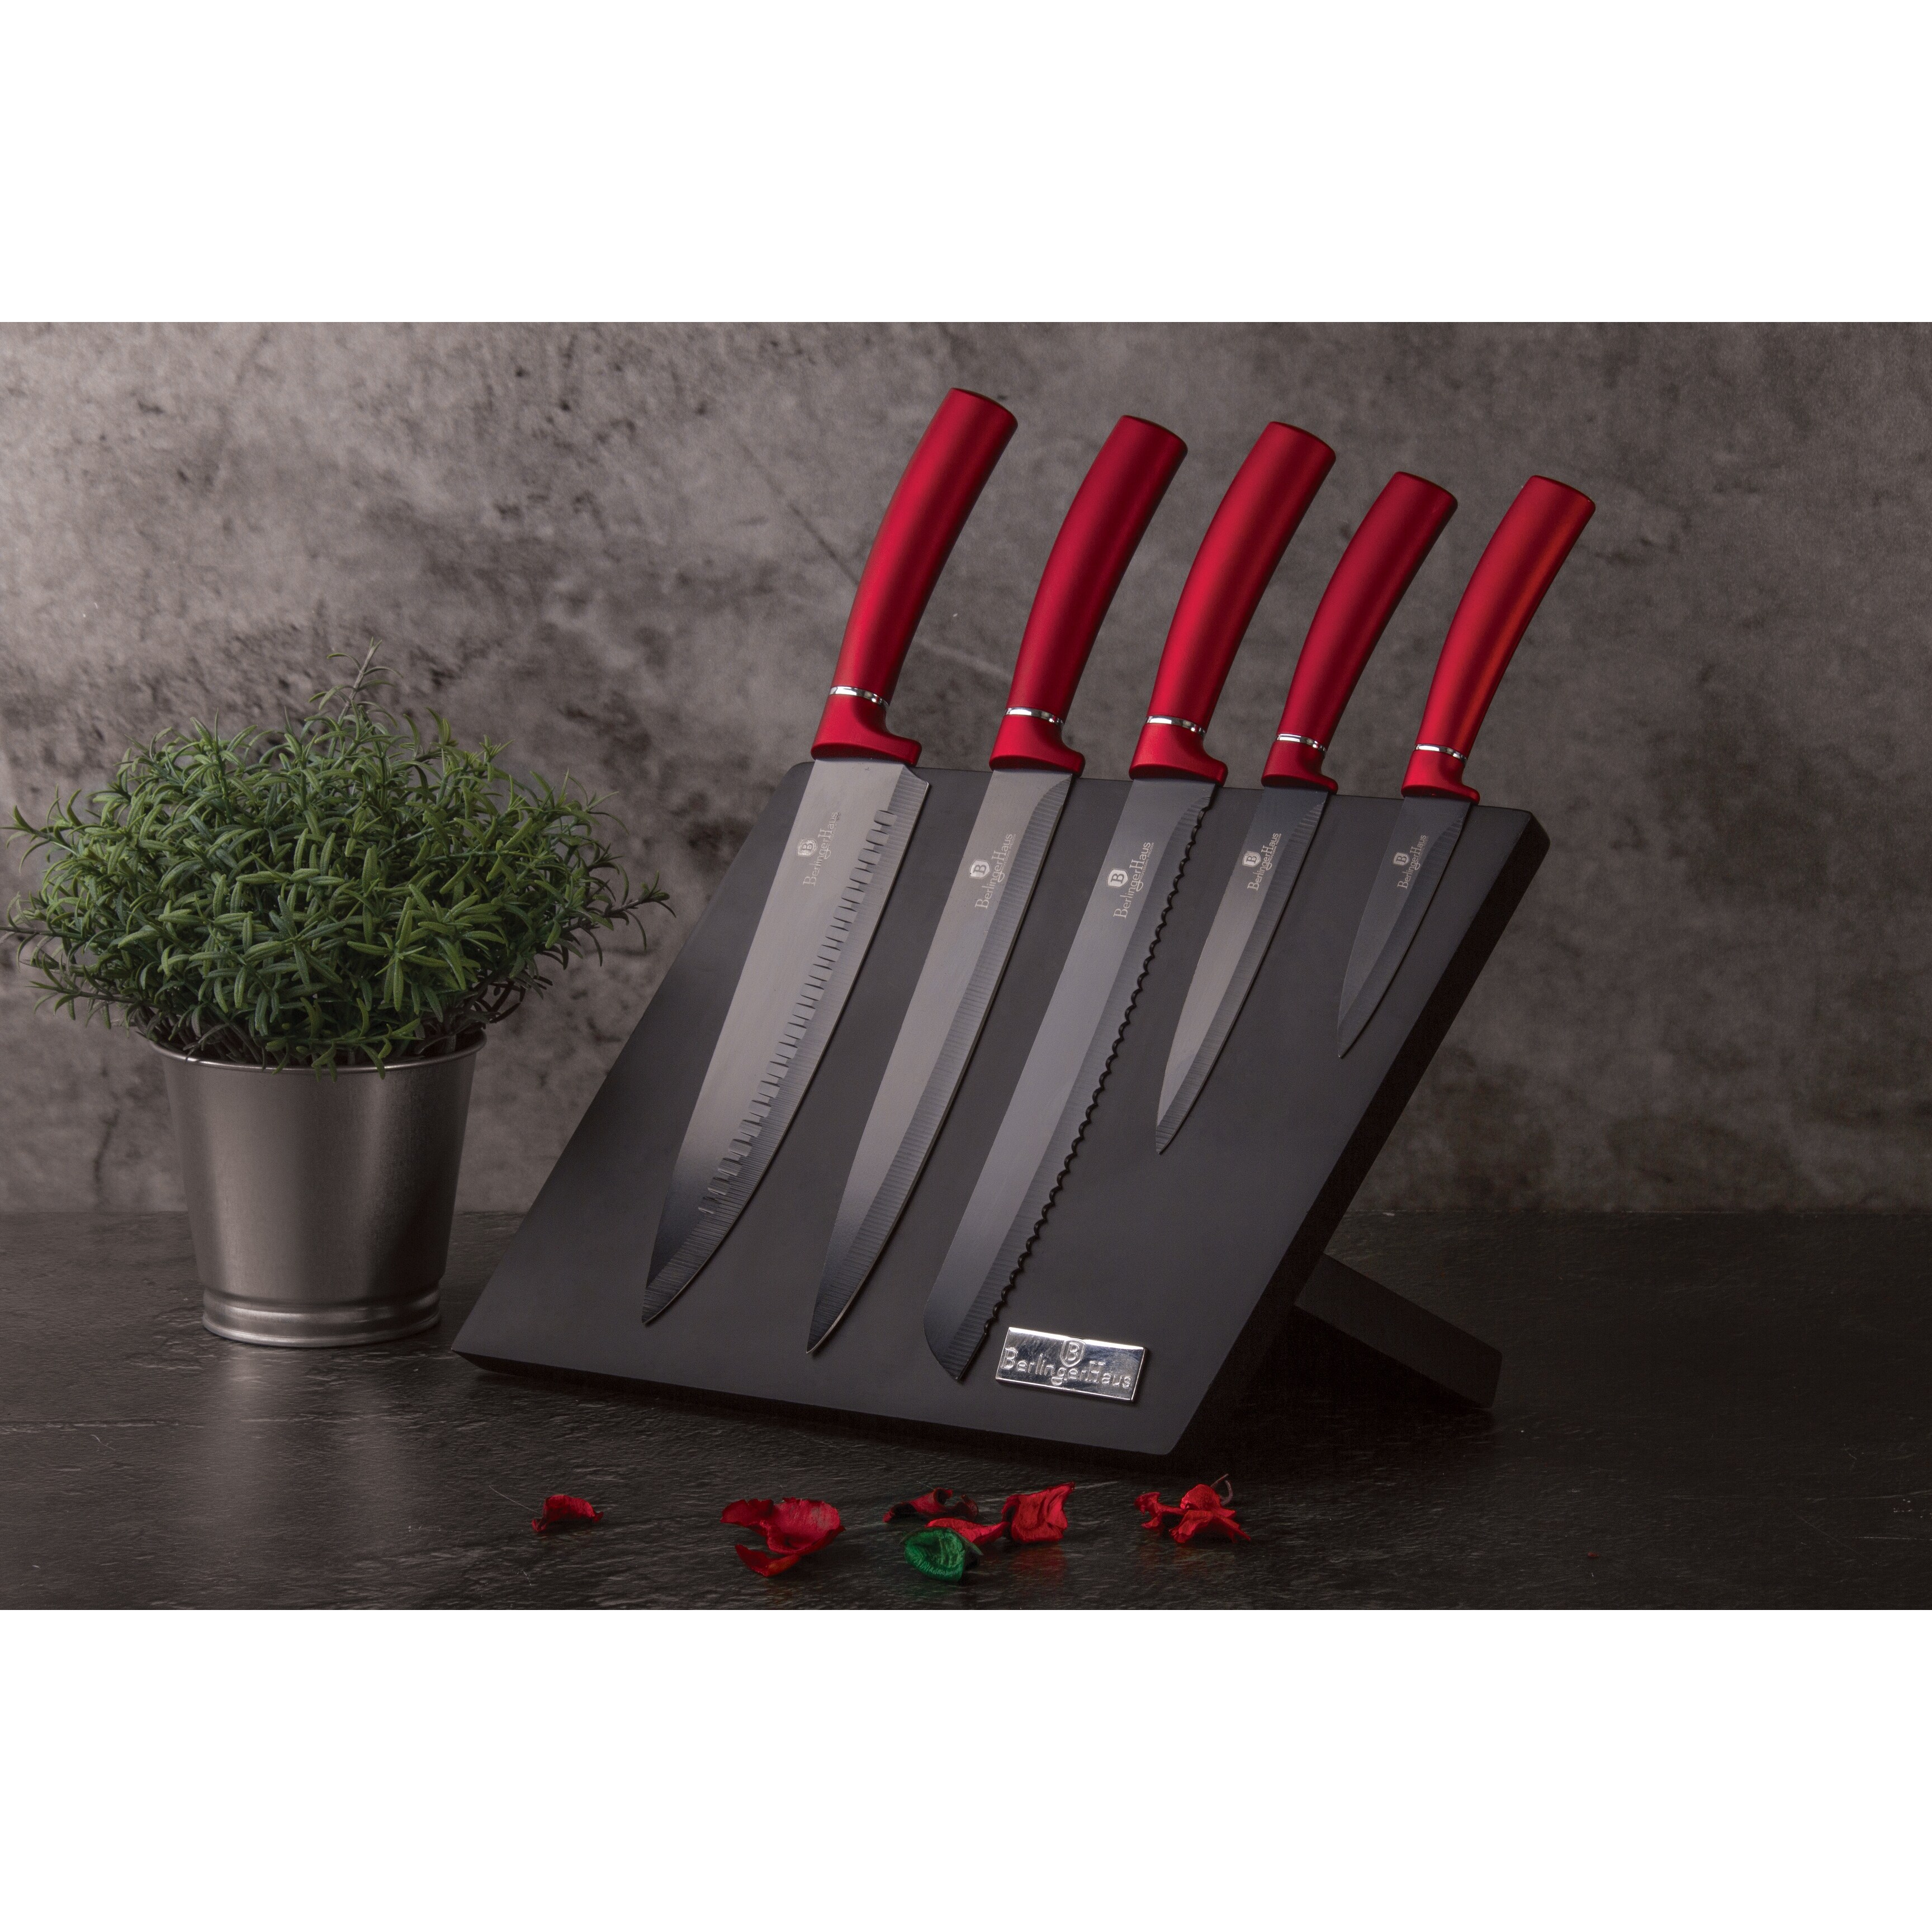 https://ak1.ostkcdn.com/images/products/is/images/direct/973166166a2cccc4106c10e7cf4961423b10cced/Berlinger-Haus-6-Piece-Knife-Set-with-Magnetic-Hanger%2C-Burgundy-Collection.jpg